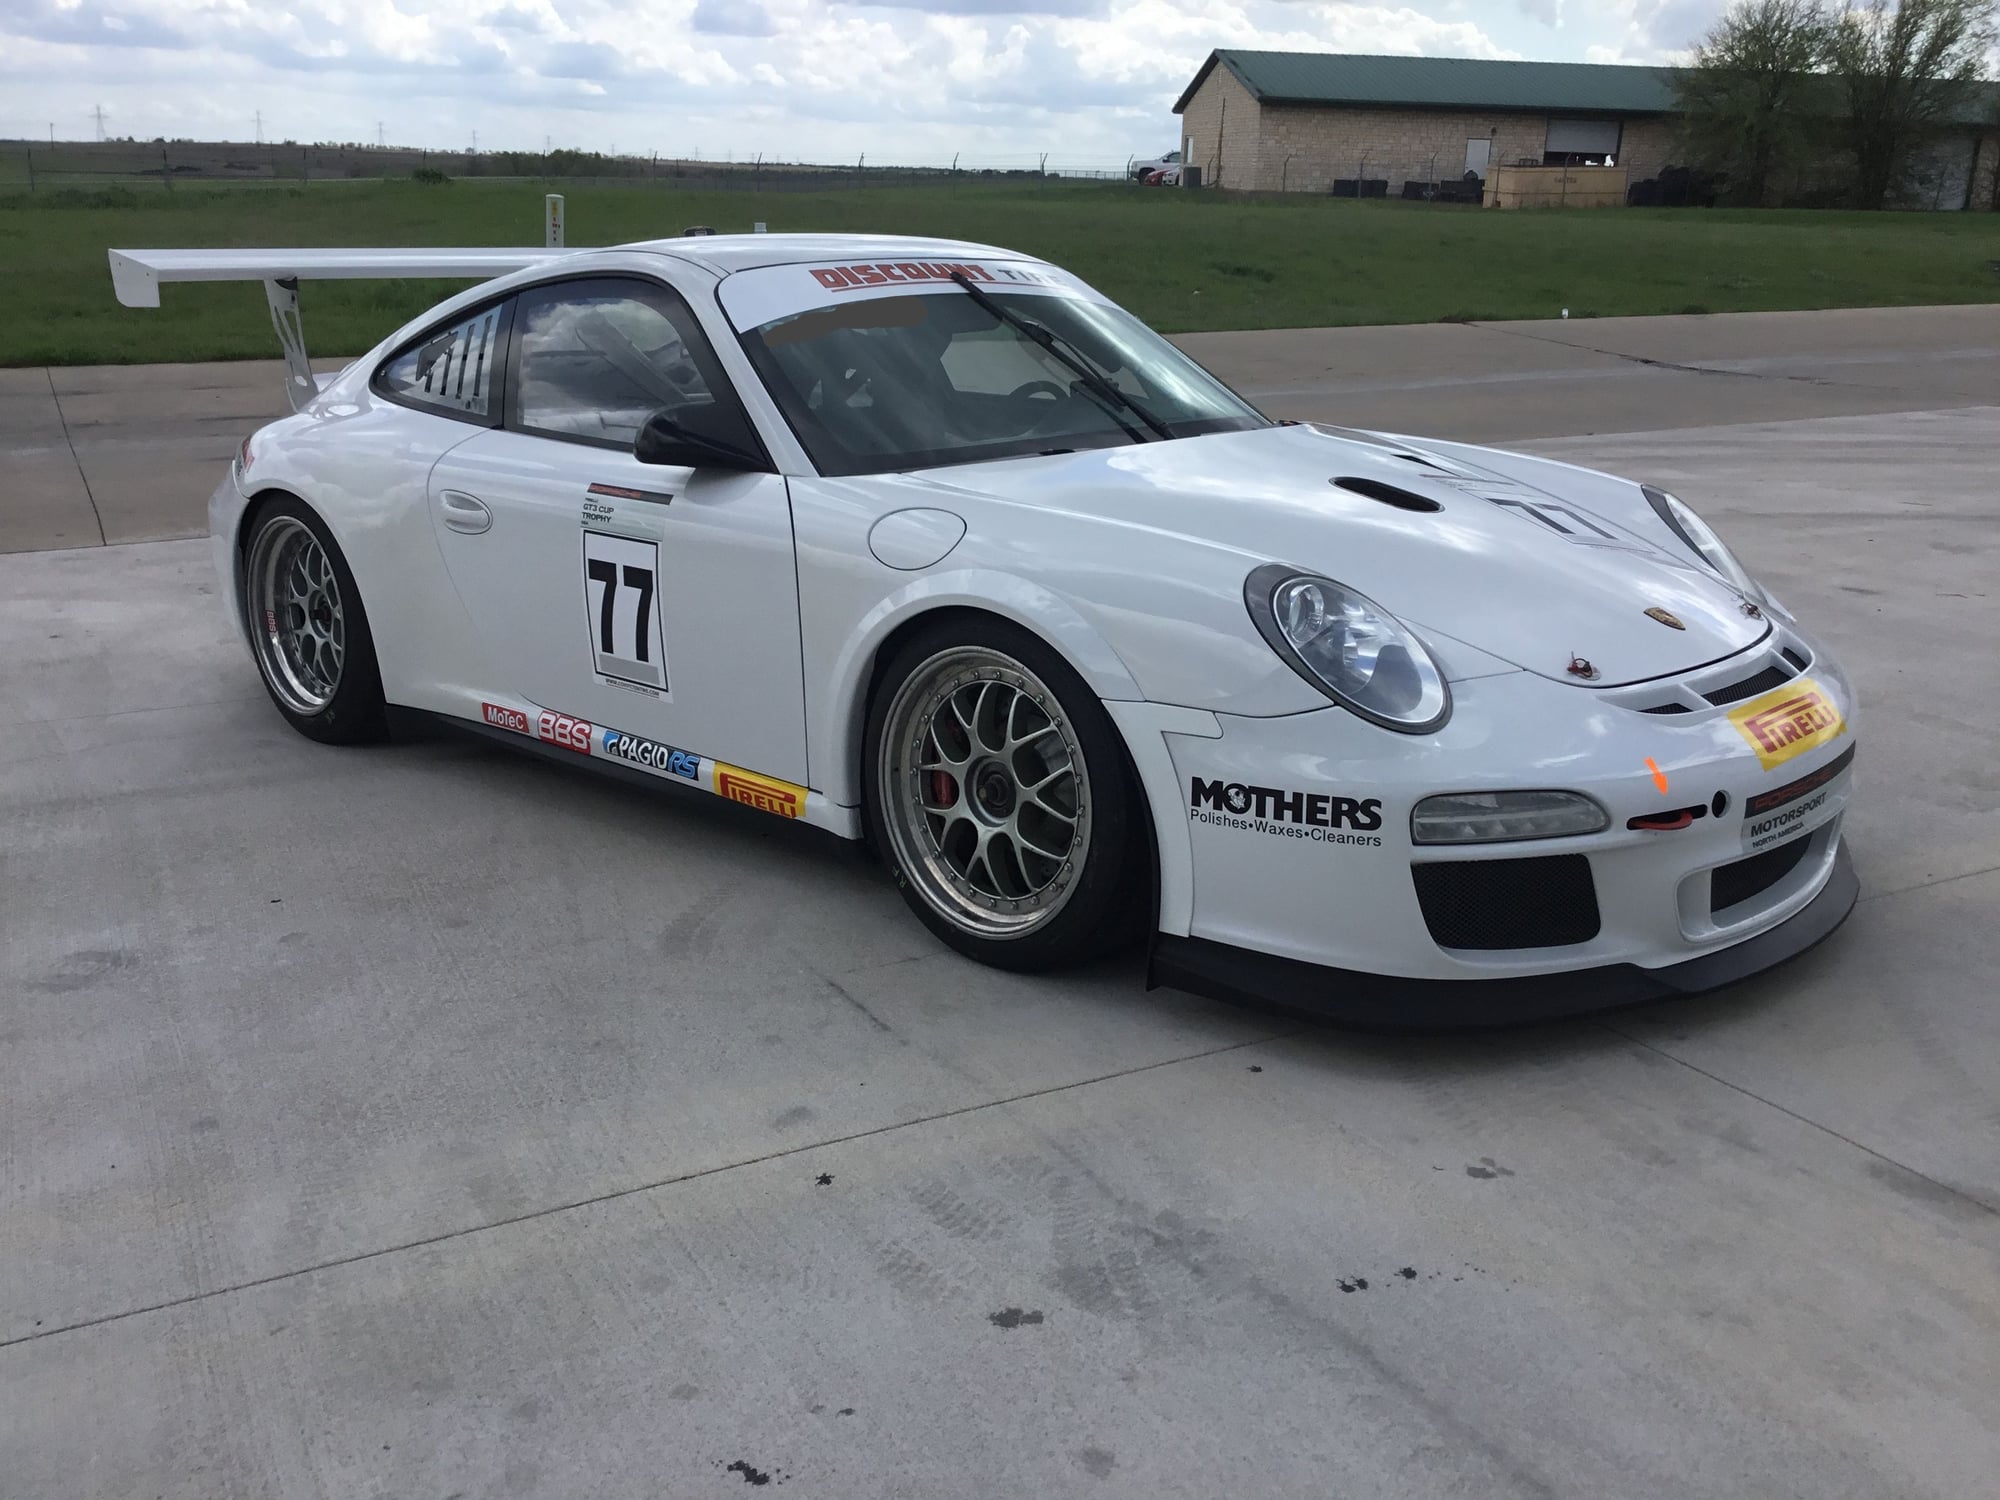 2011 Porsche GT3 - 2011 997.2 (Gen II) Porsche GT3 Cup Racecar - Used - VIN WP0ZZZ99ZBS798199 - 11,800 Miles - 6 cyl - 2WD - Coupe - White - Cresson, TX 76035, United States